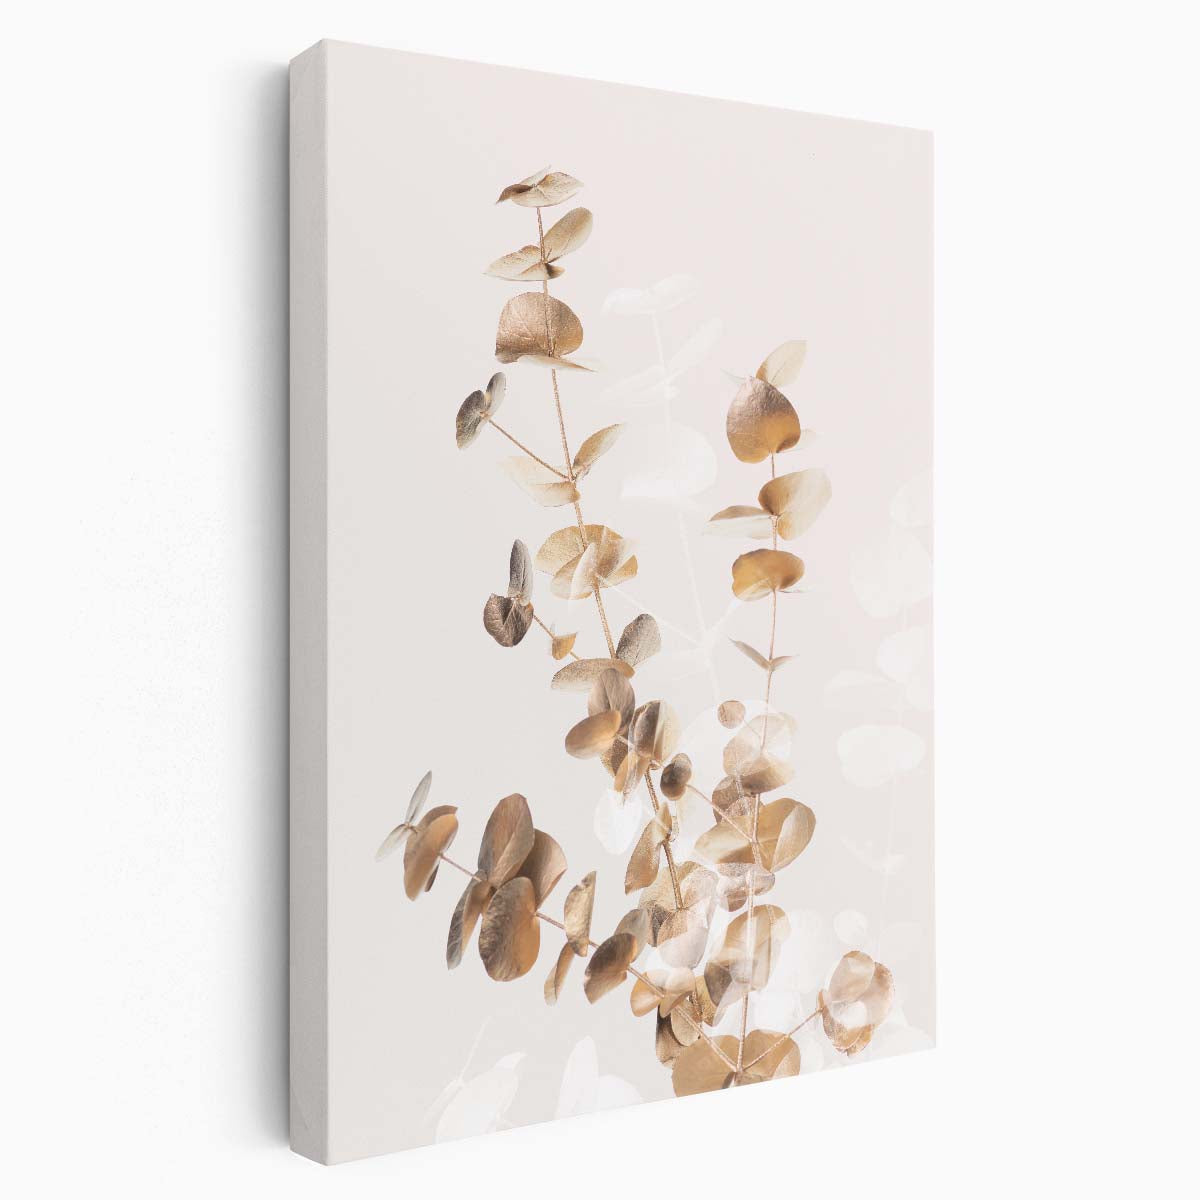 Golden Eucalyptus Plant Photography , Double Exposure Still Life Art by Luxuriance Designs, made in USA